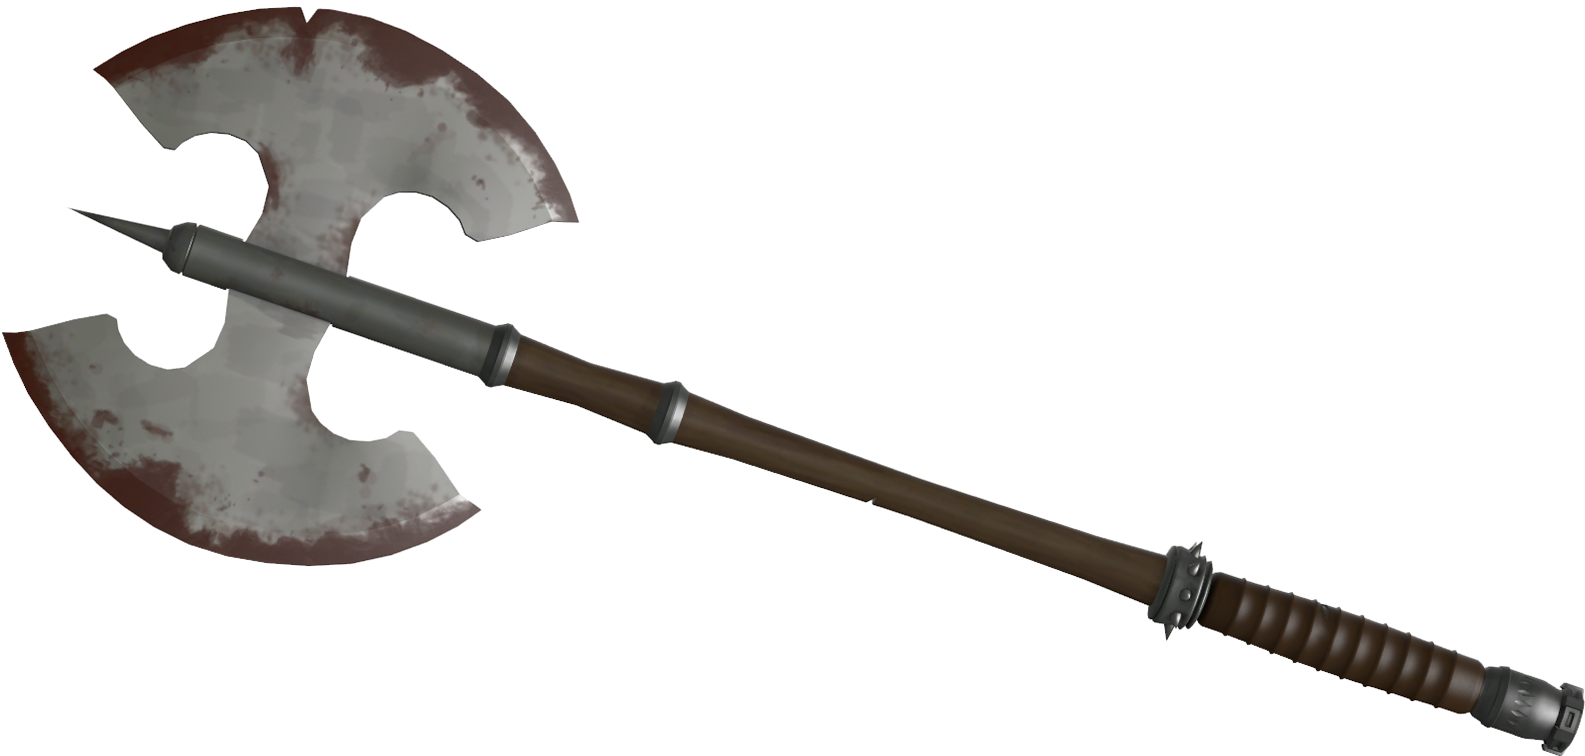 Nightmare-ffxii-weapon.png